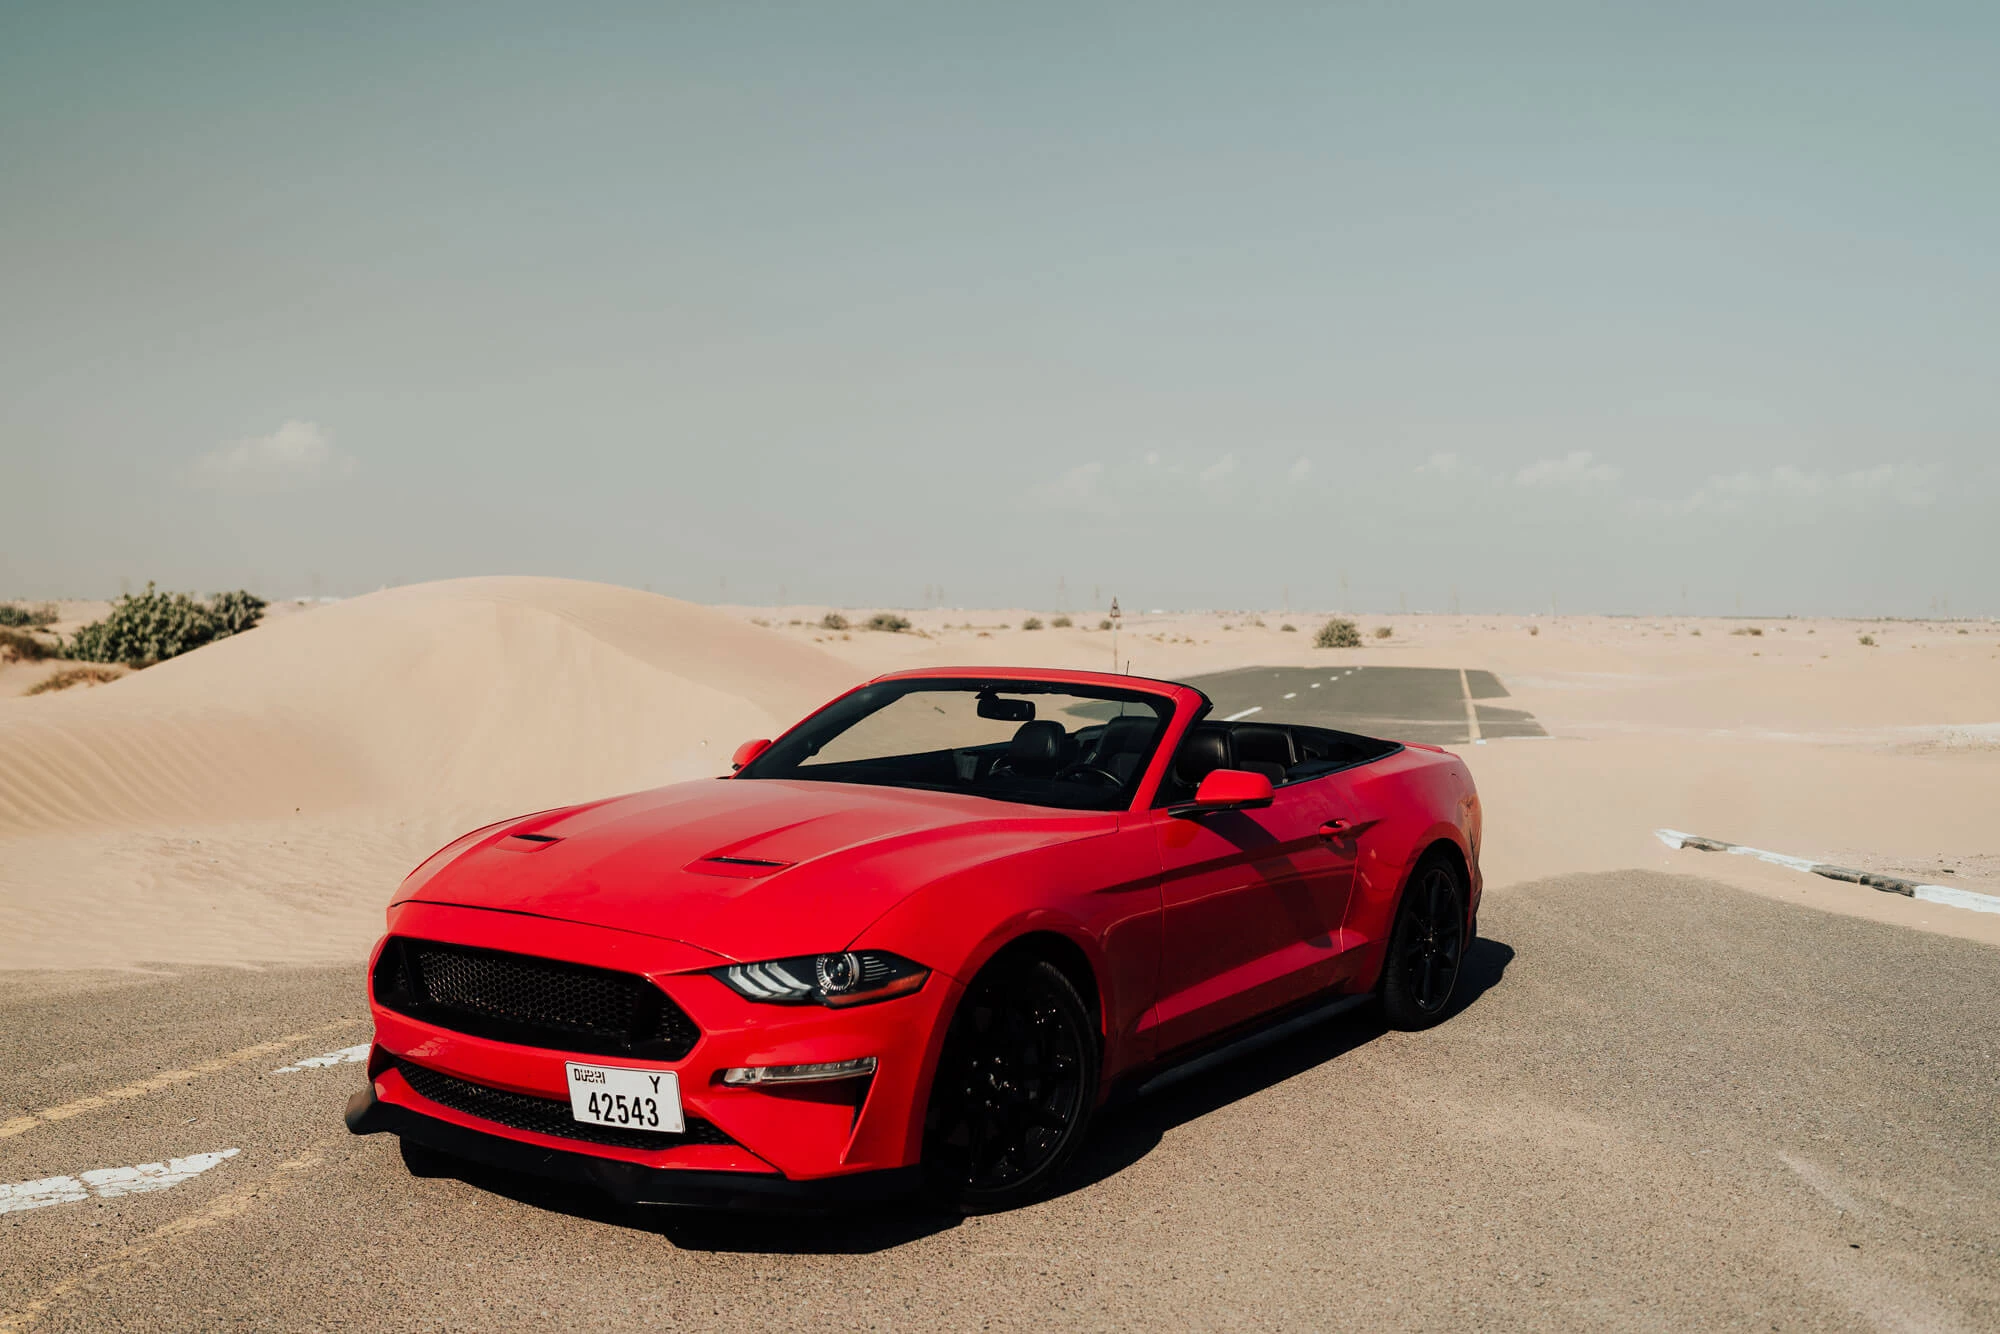 Ford Mustang (red)